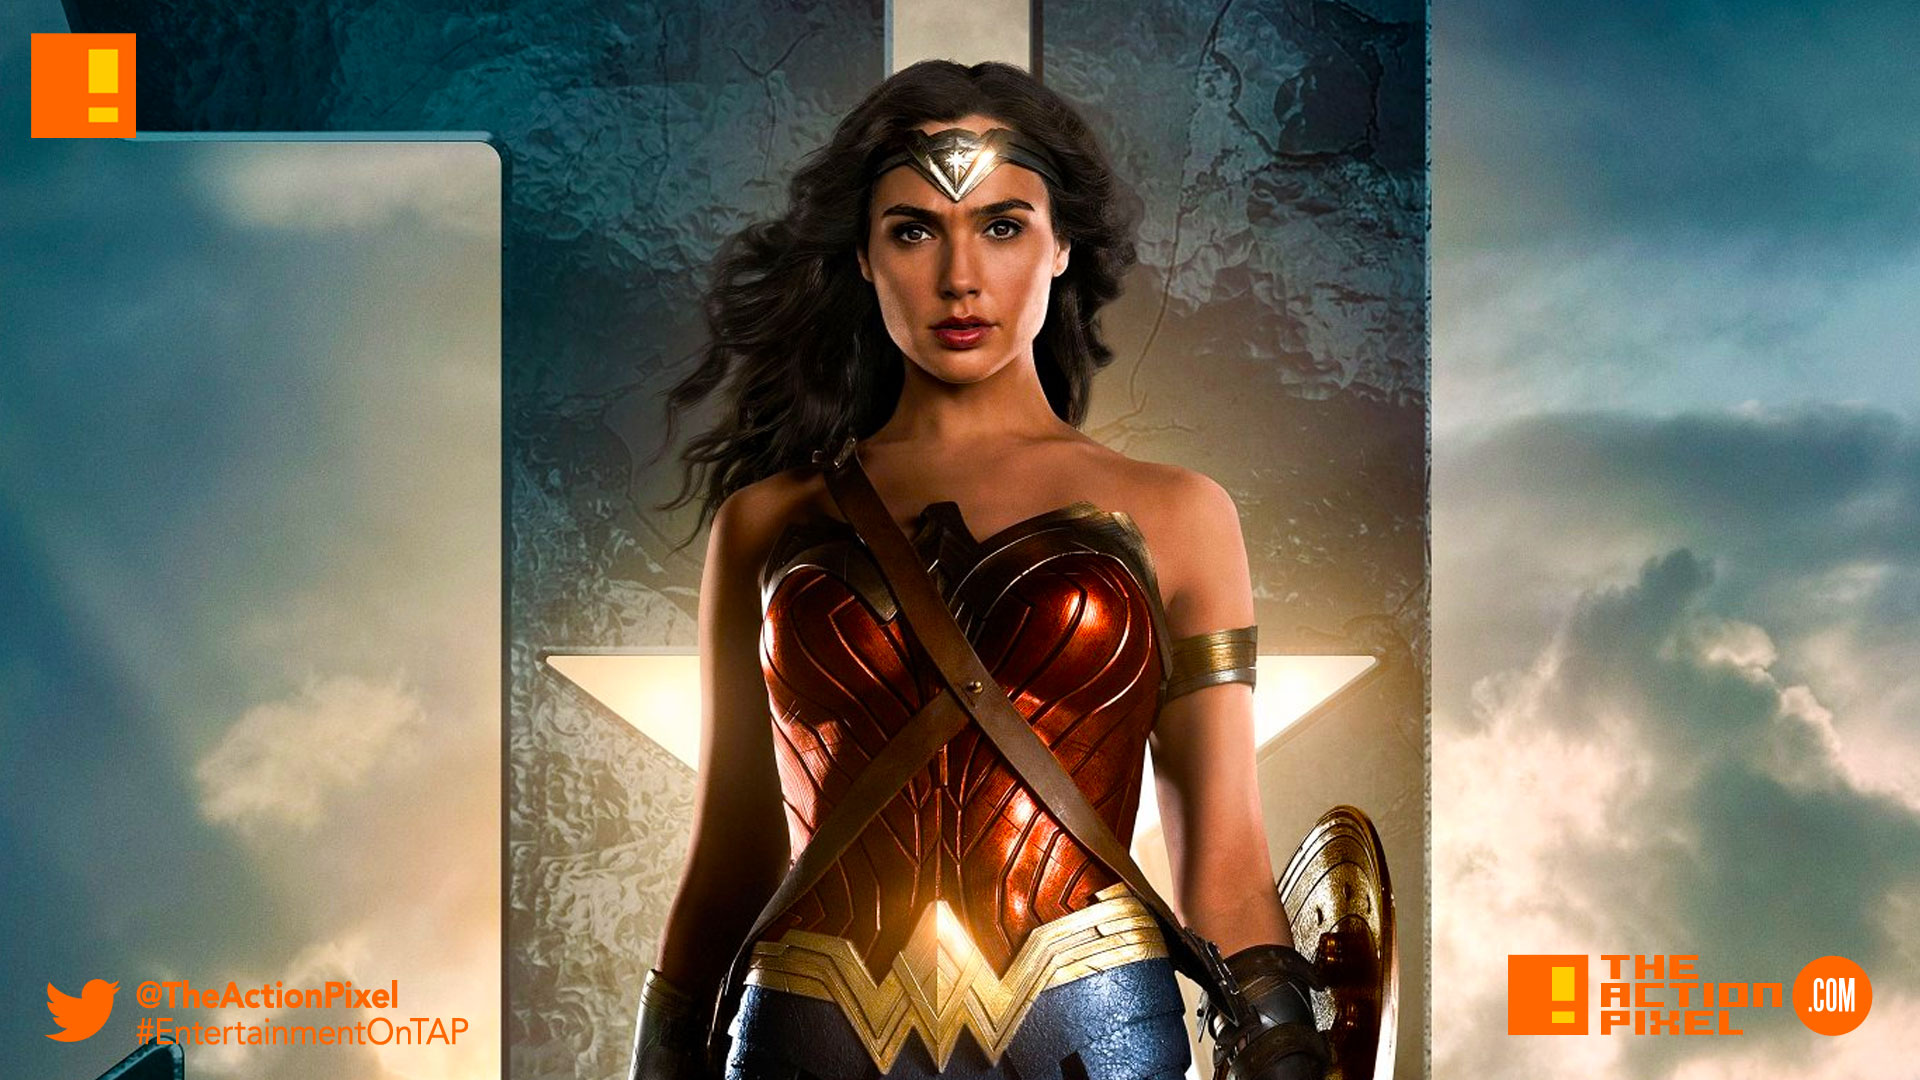 justice league, dc comics, dc entertainment, jl, justice league movie, wb pictures, warner bros. entertainment, the action pixel, entertainment on tap, poster,gal gadot,diana prince, amazon, amazonian, amazonian princess, princess, wonder woman, promo,teaser, trailer , character poster,